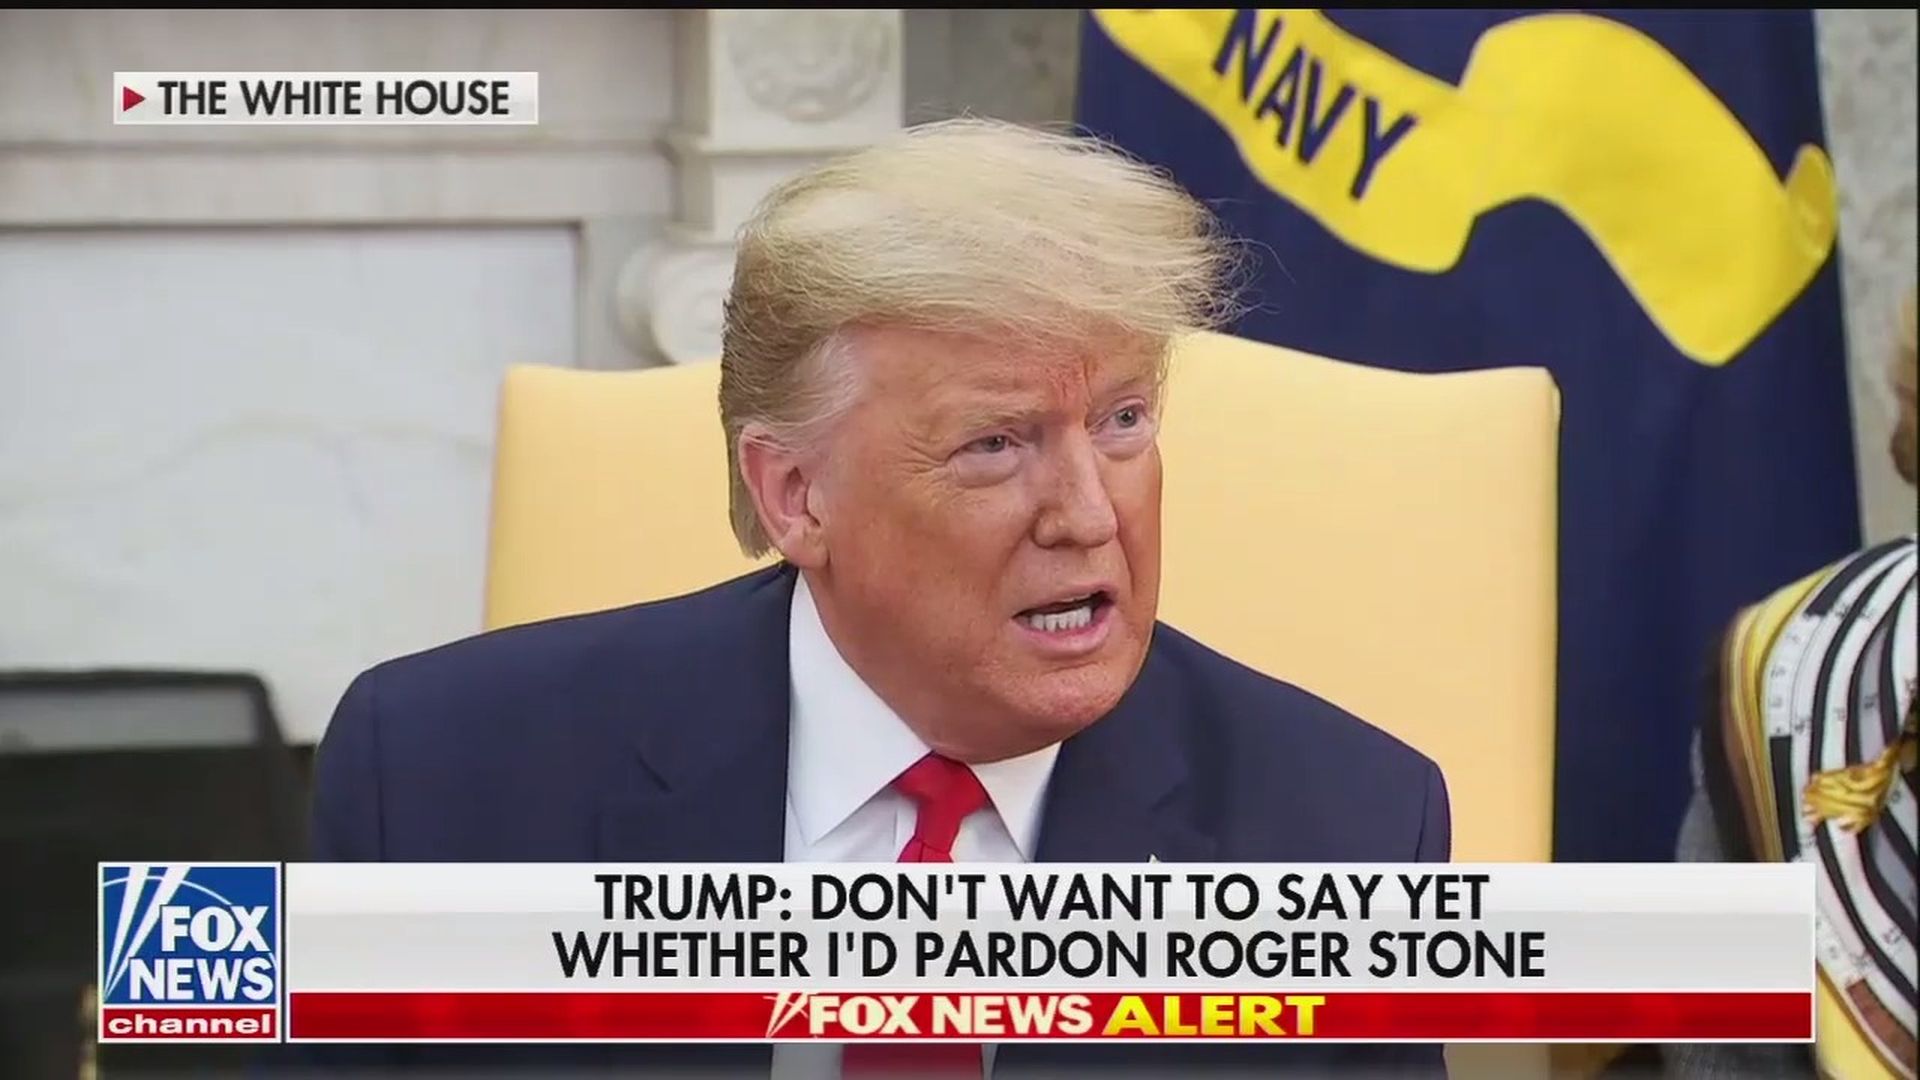 This image is a screenshot of Trump on Fox News with the caption saying he doesn't yet know if he'll pardon Stone